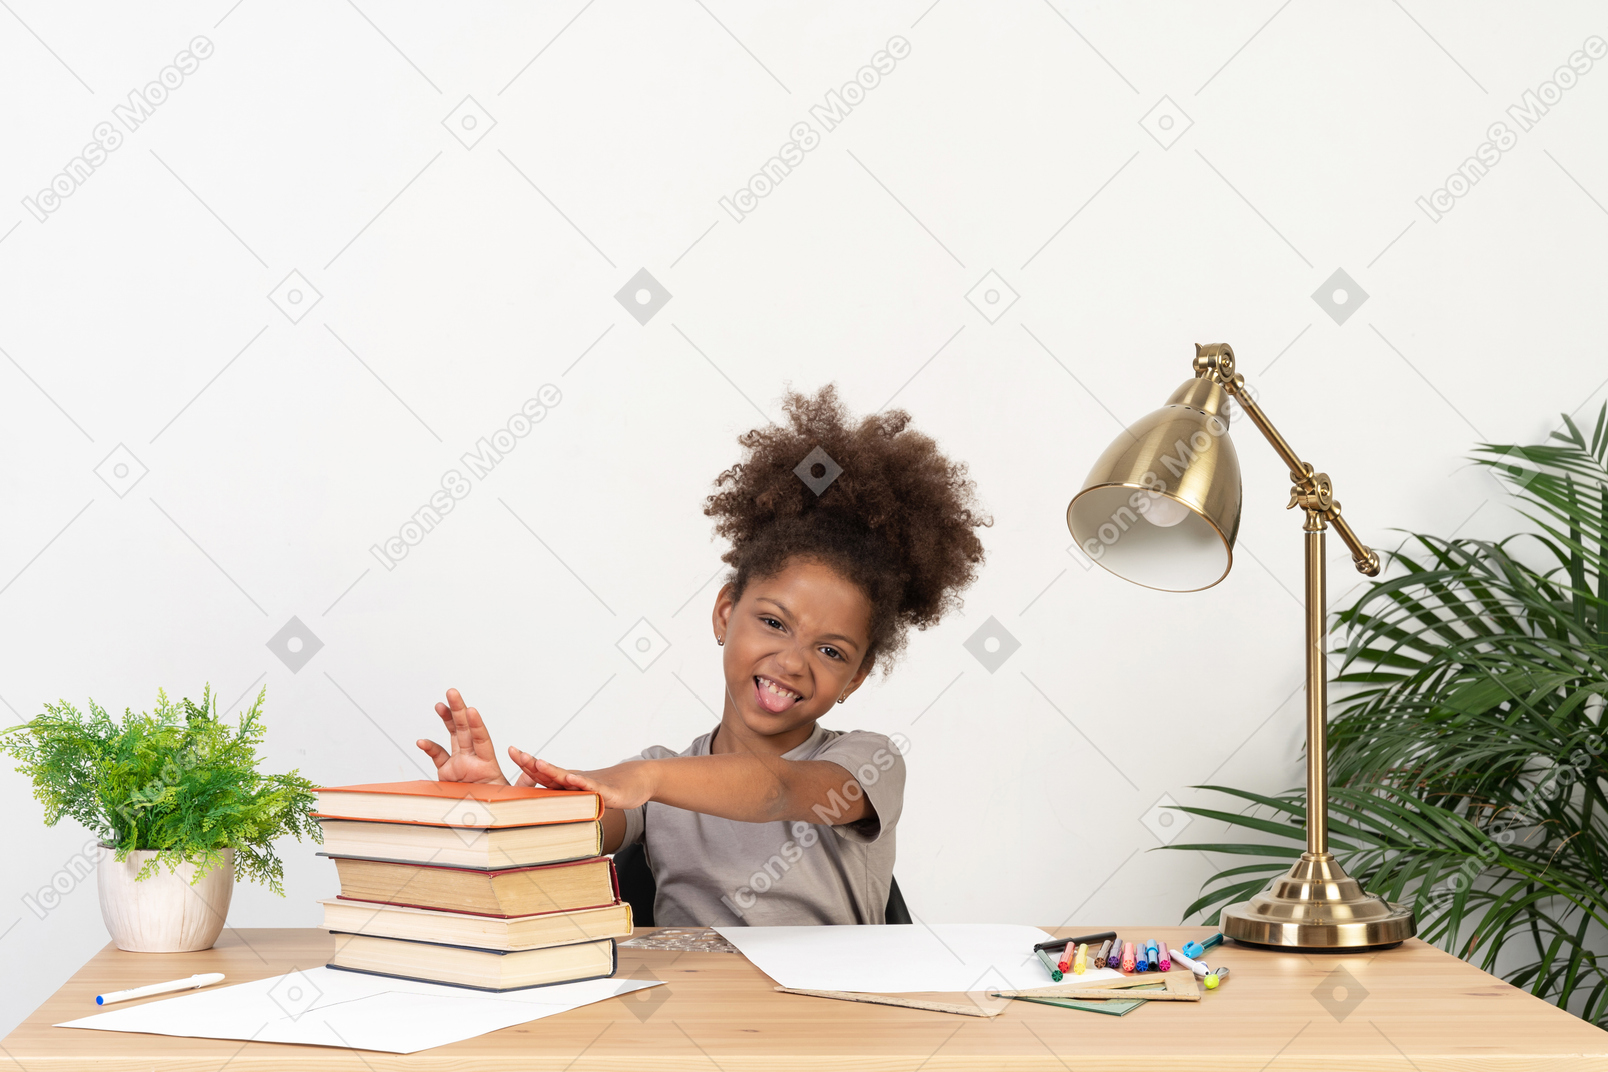 Prudent girl sitting at a table with books and showing her tongue